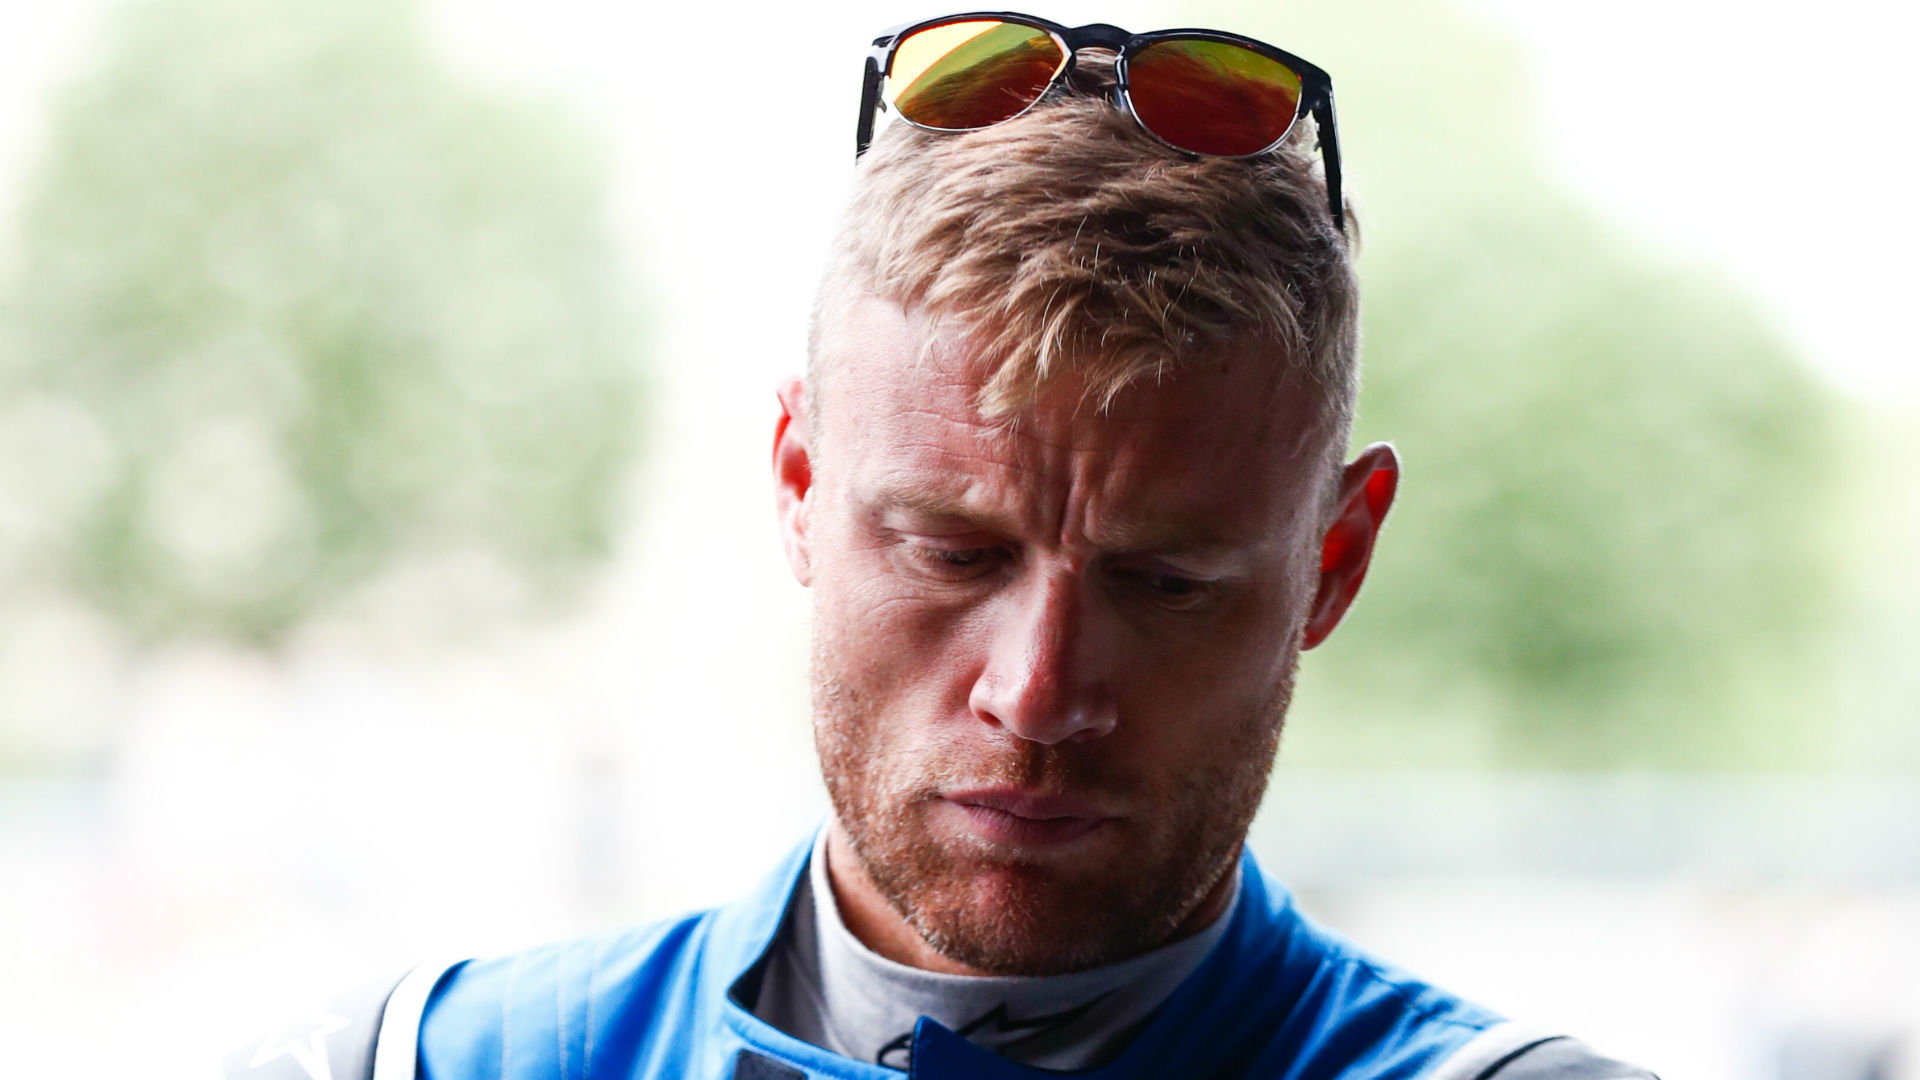 Former England cricketer Andrew Flintoff suffered a high-speed crash while filming for BBC series Top Gear on Tuesday.